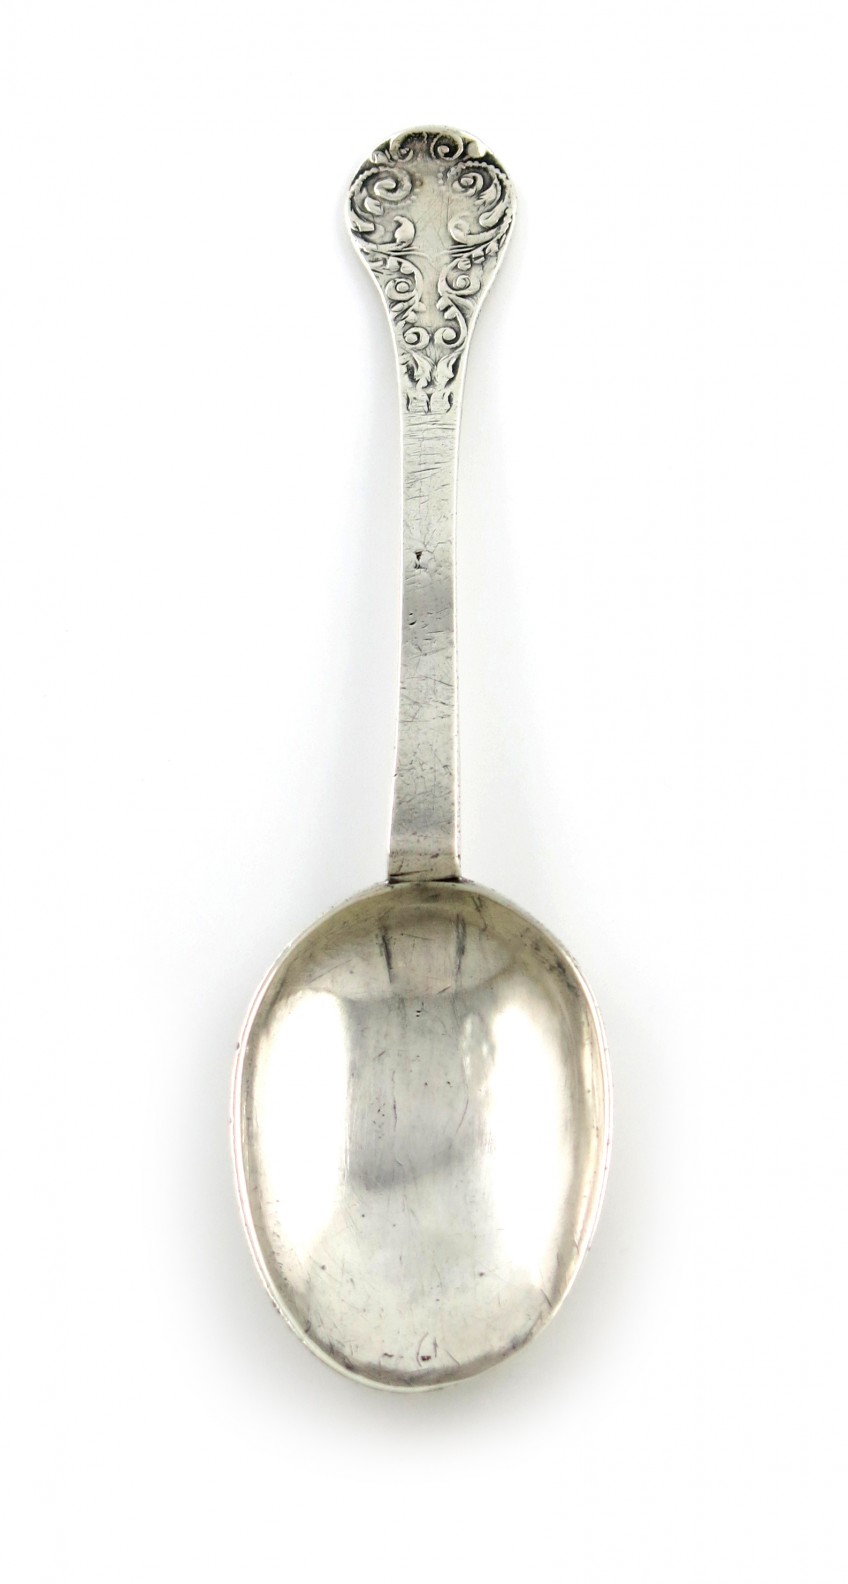 Rare Aberdeen spoon could realise £15,000 at auction